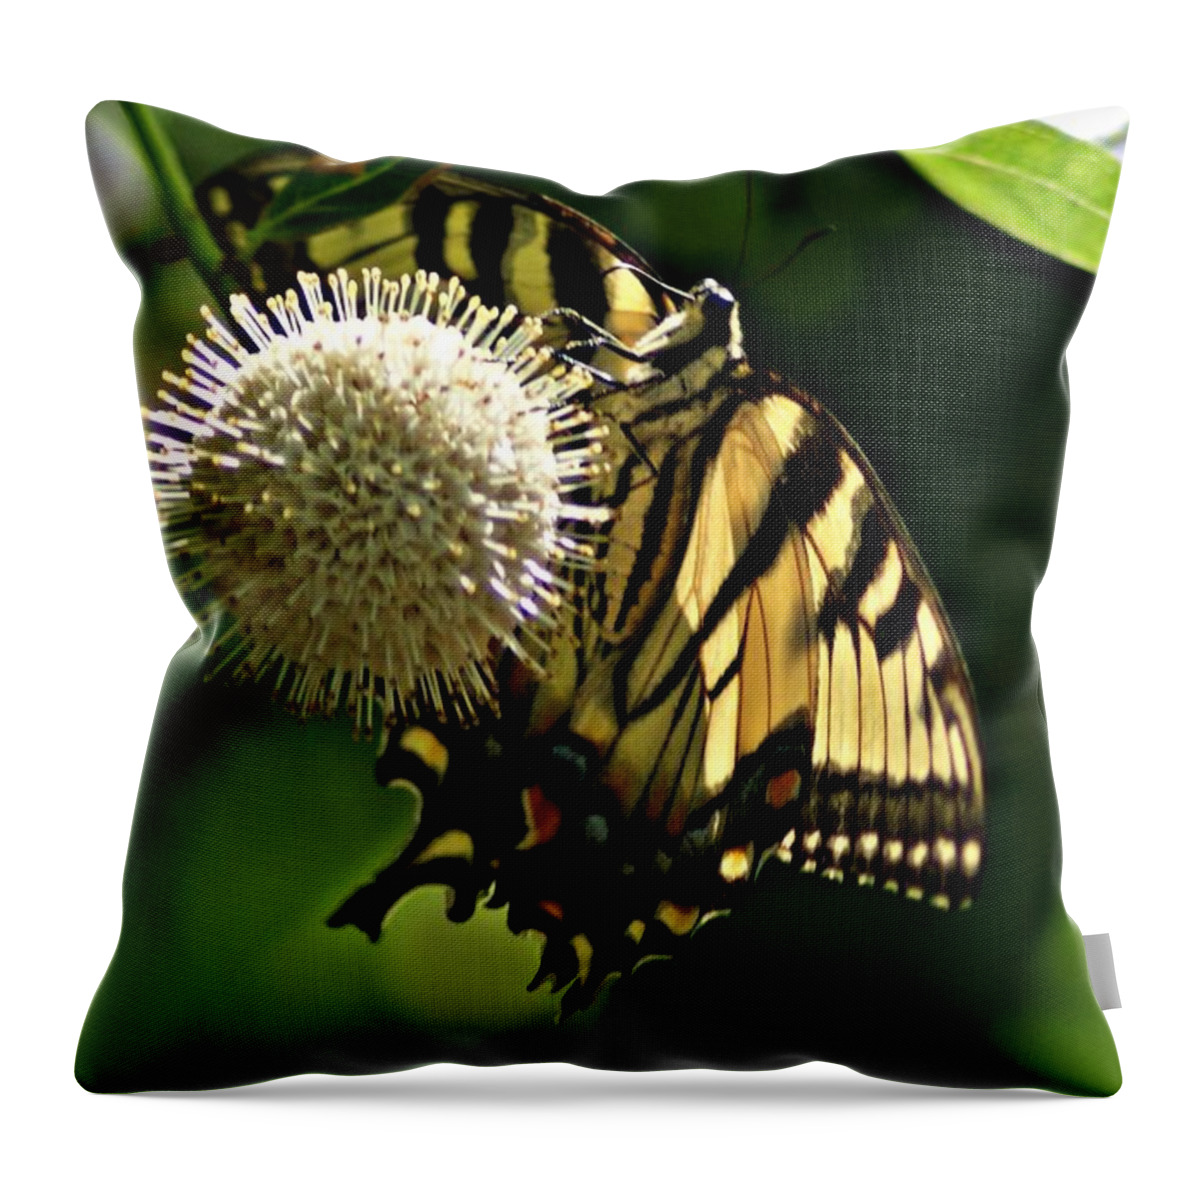 Butterfly Throw Pillow featuring the photograph Butterfly 2 by Joe Faherty